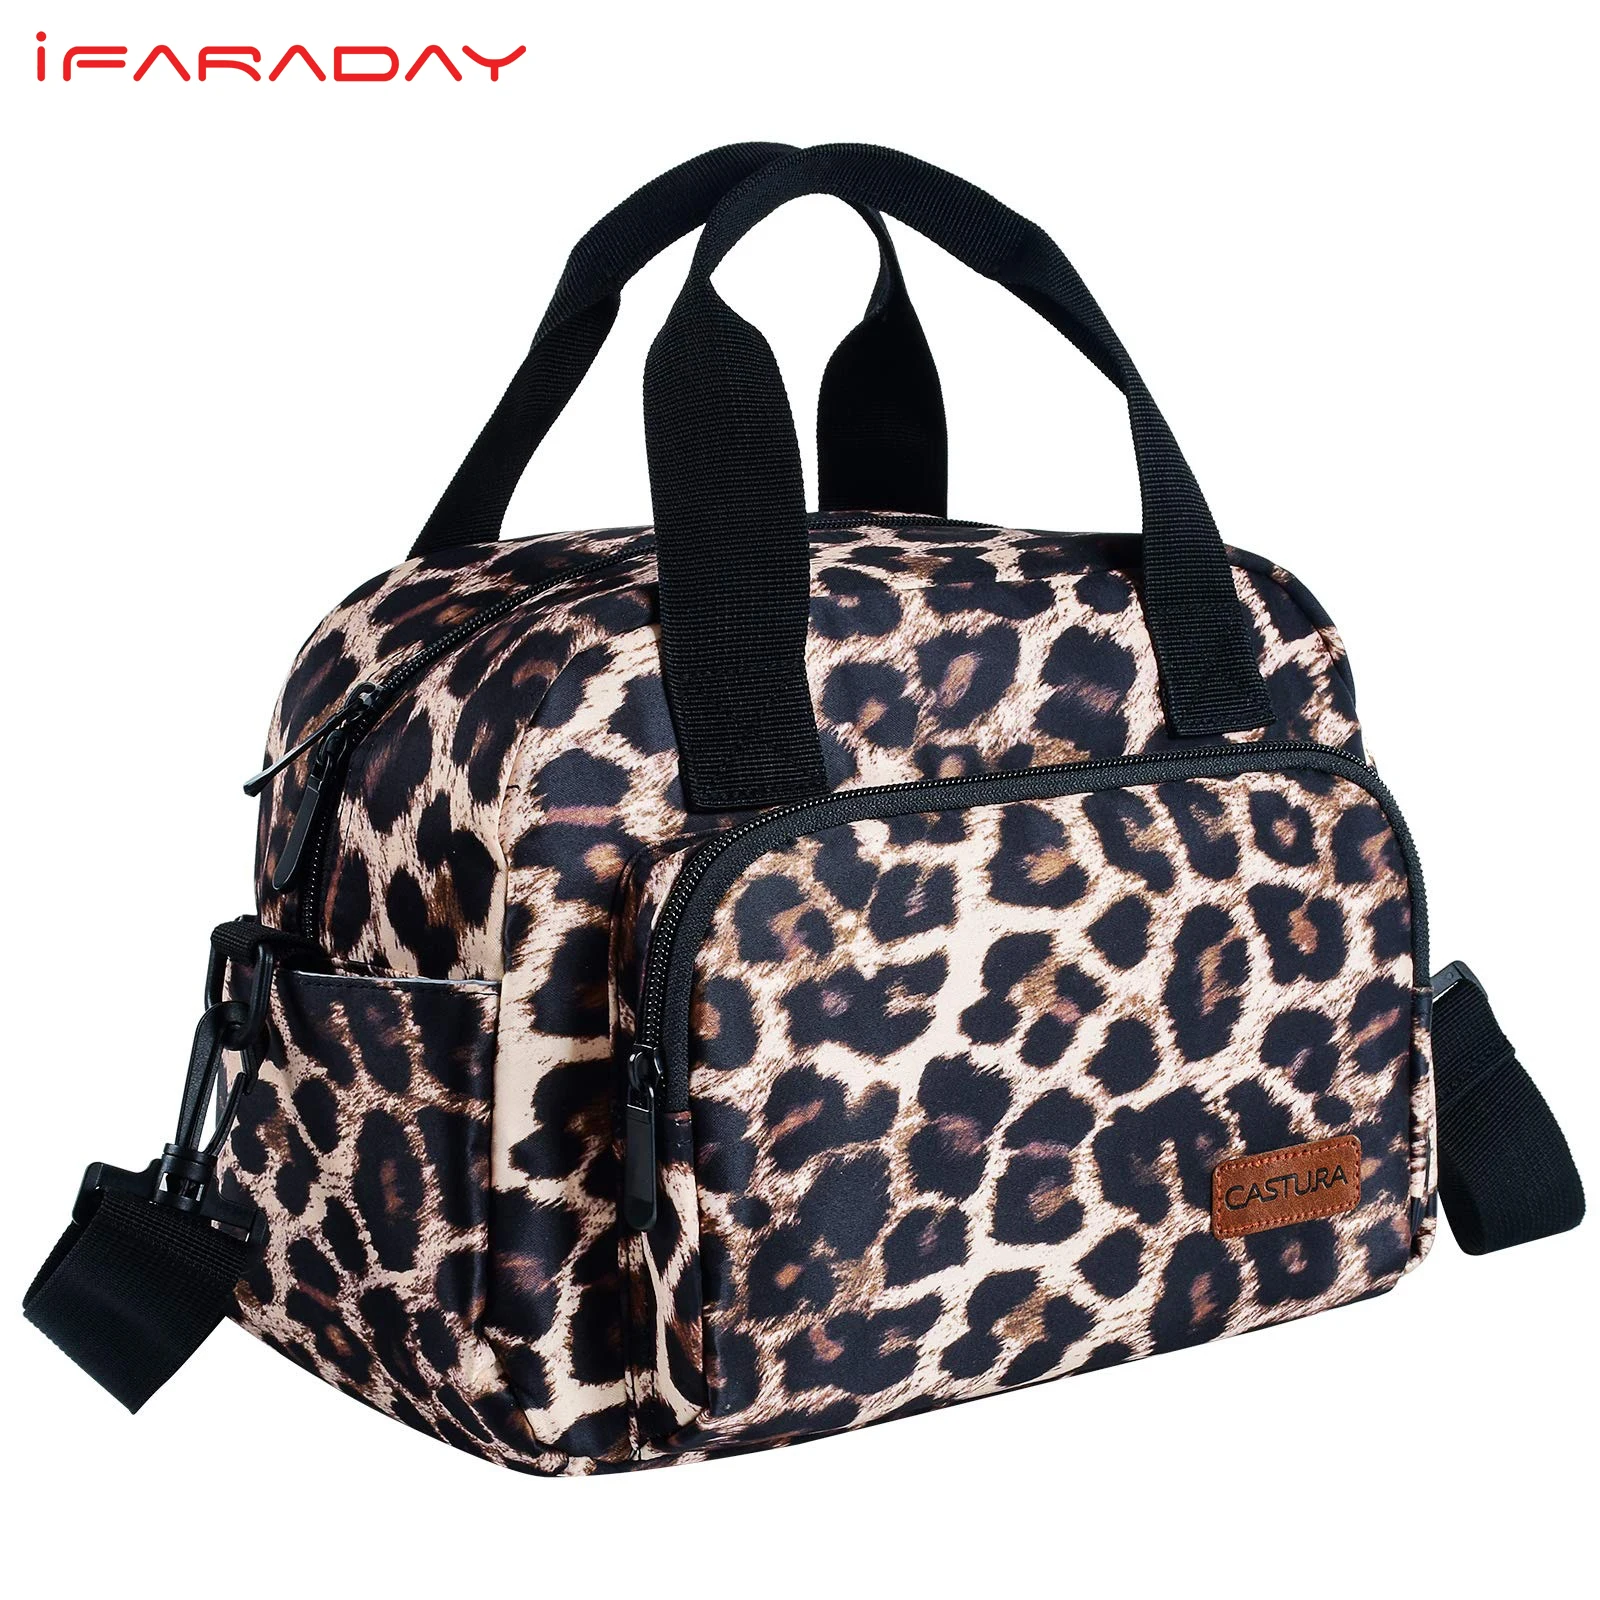 iFARANDY Womens Lunch Bags,Insulated Lunch Box Cooler Thermal Bag with Detachable Shoulder Strap White Leopard